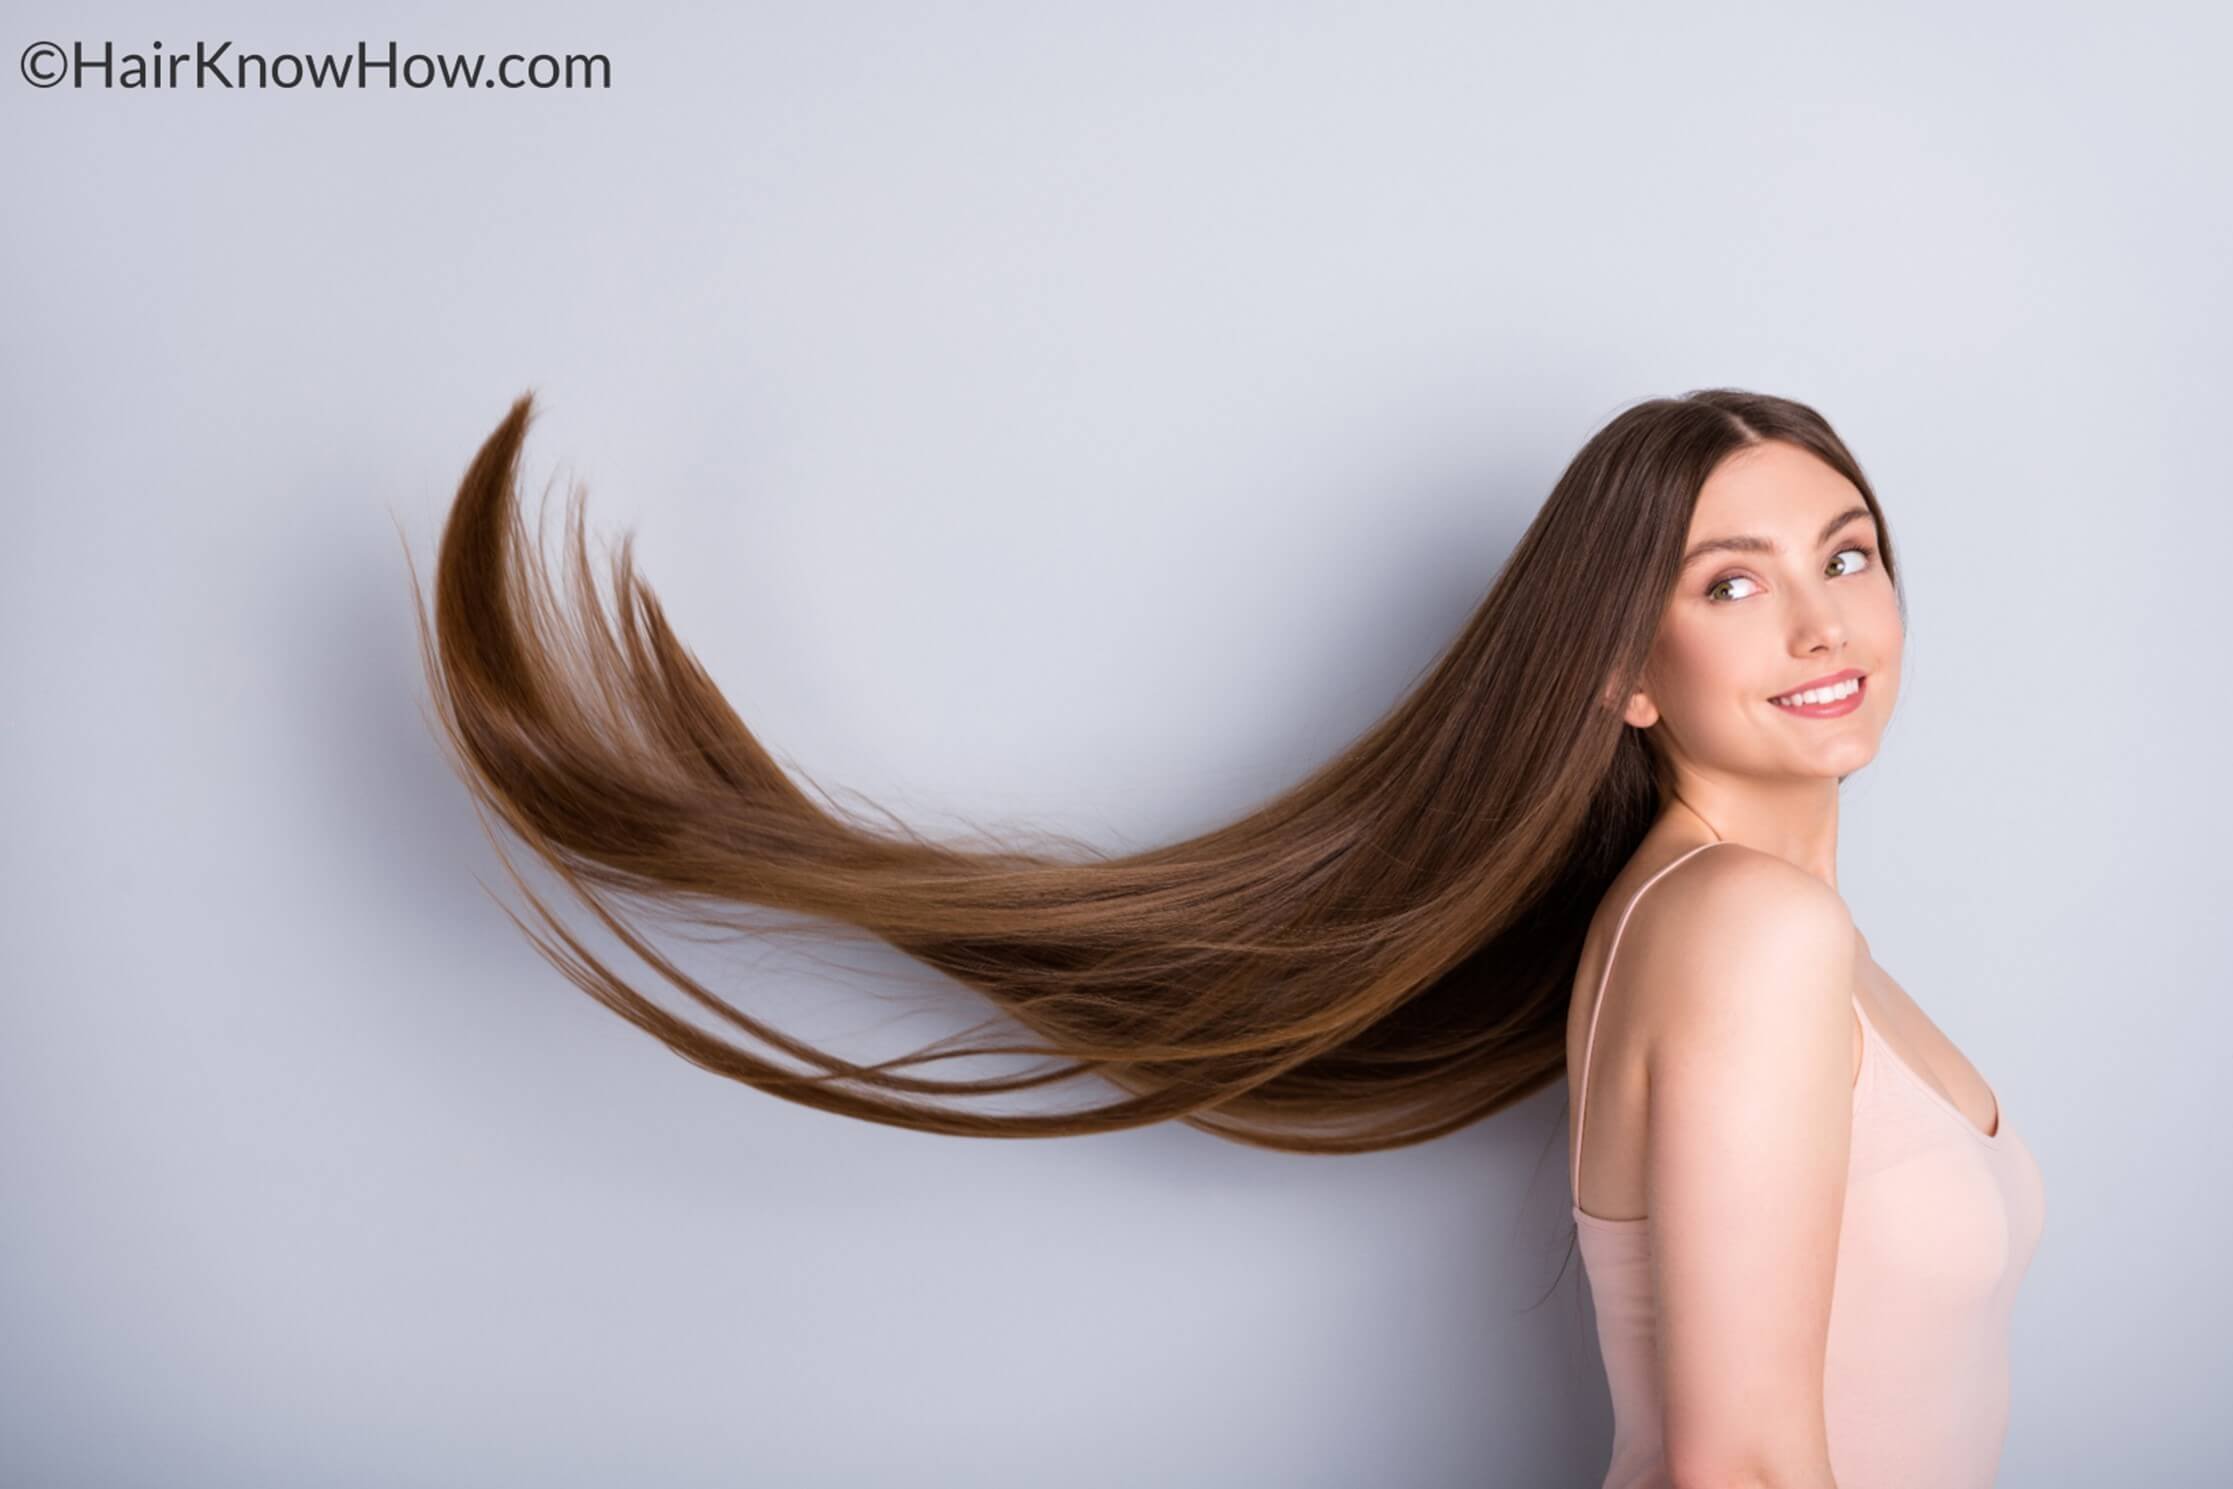 Hair Growth - Learn The Science That Determines How Fast Your Hair Grows —   Get Accurate Results with Our Professional Hair Test &  Analysis Services - Unlock Your Hair's True Potential